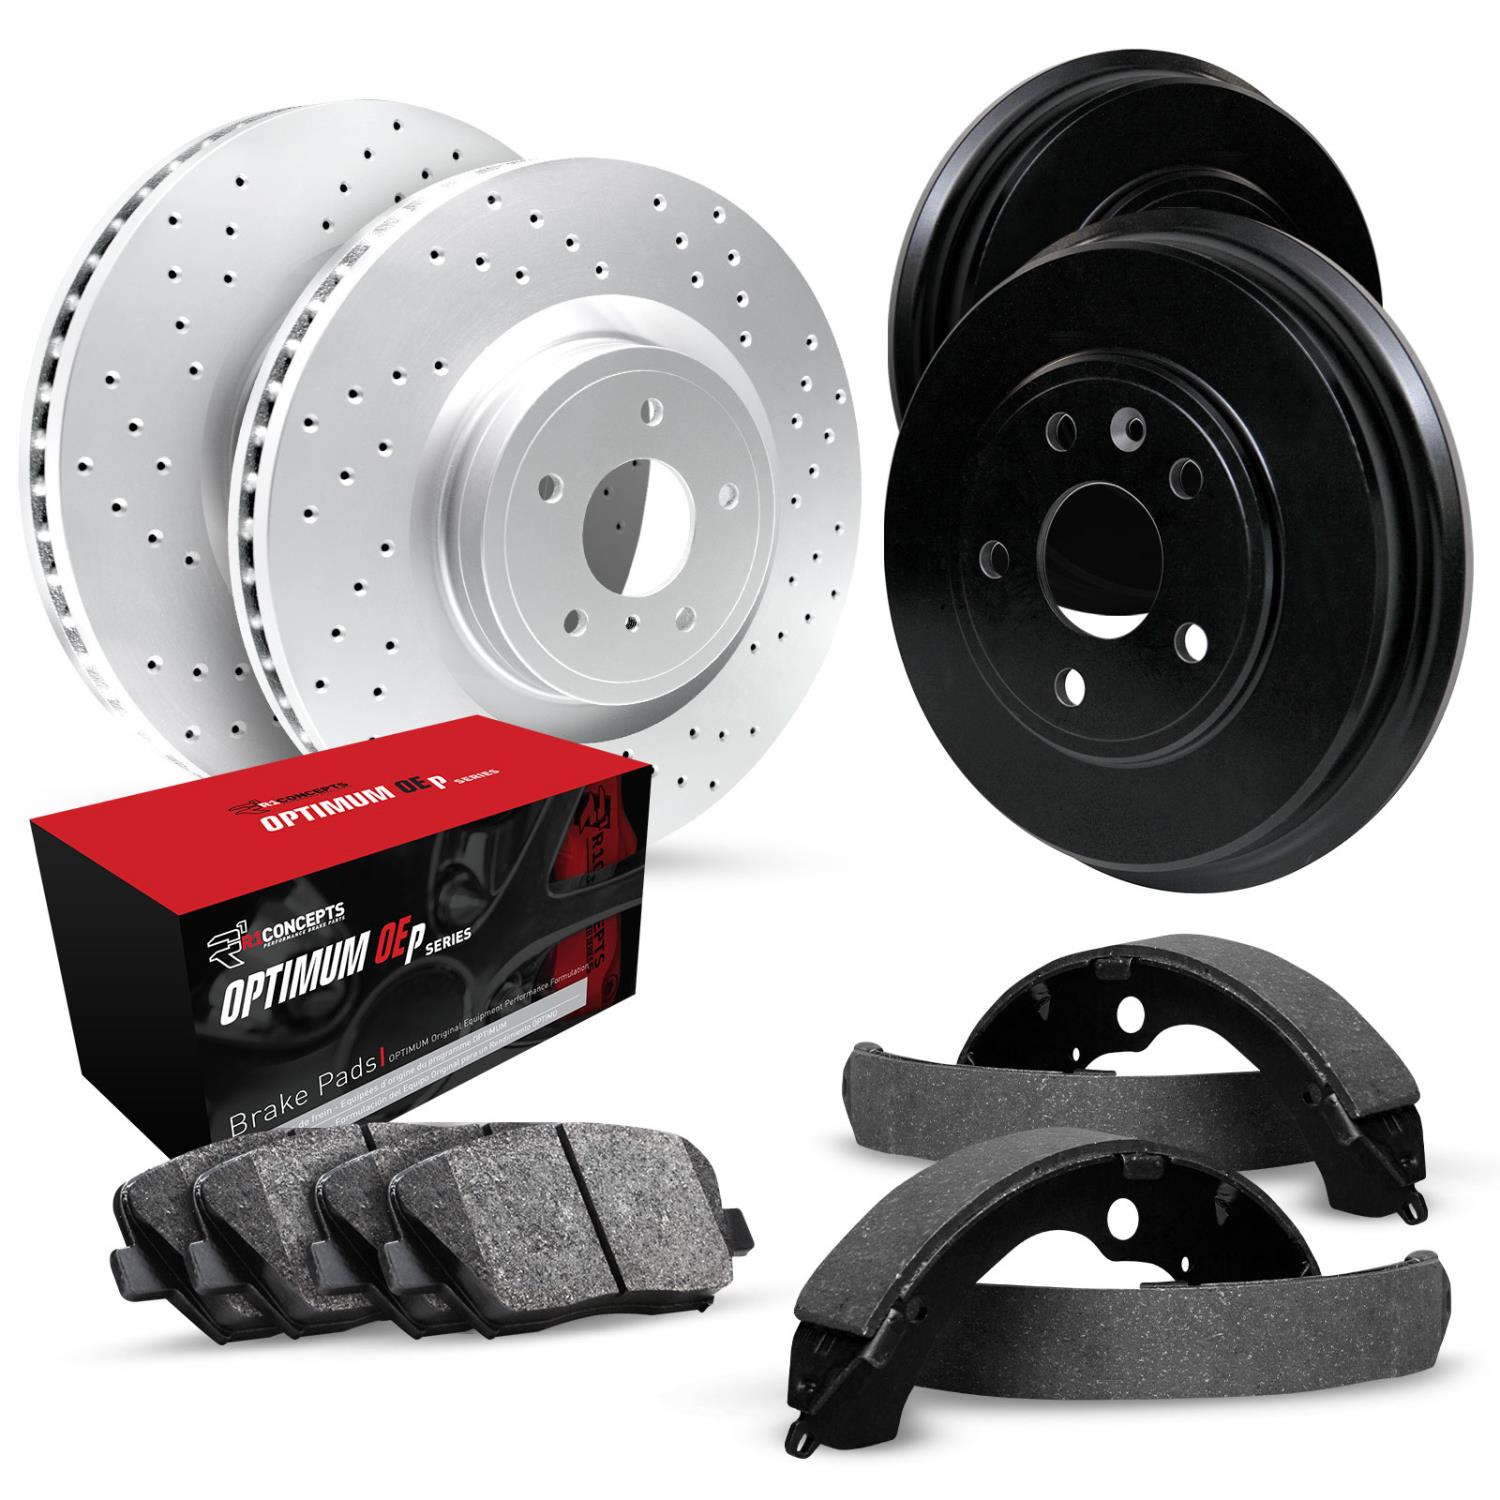 GEO-Carbon Drilled Brake Rotor & Drum Set w/Optimum OE Pads & Shoes, 1971-1973 GM, Position: Front & Rear